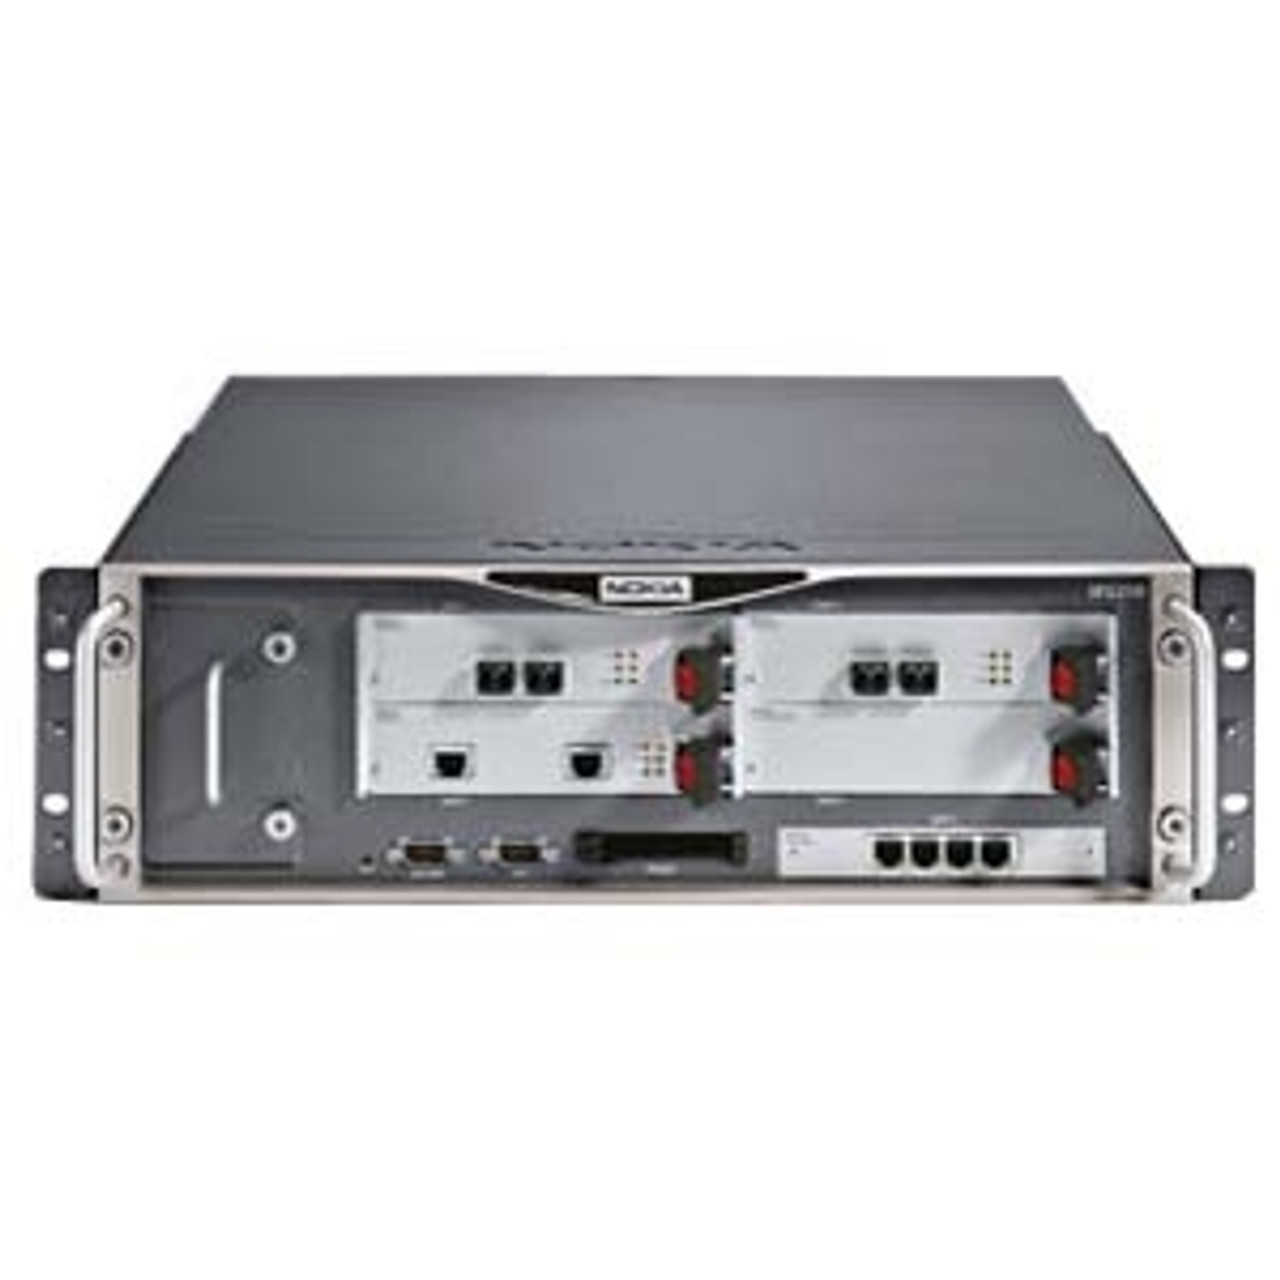 NBB2255JSF Nokia IP2255 Security Appliance 4 x cPCI , 4 x Expansion Slot , 2 x PC Card Type II